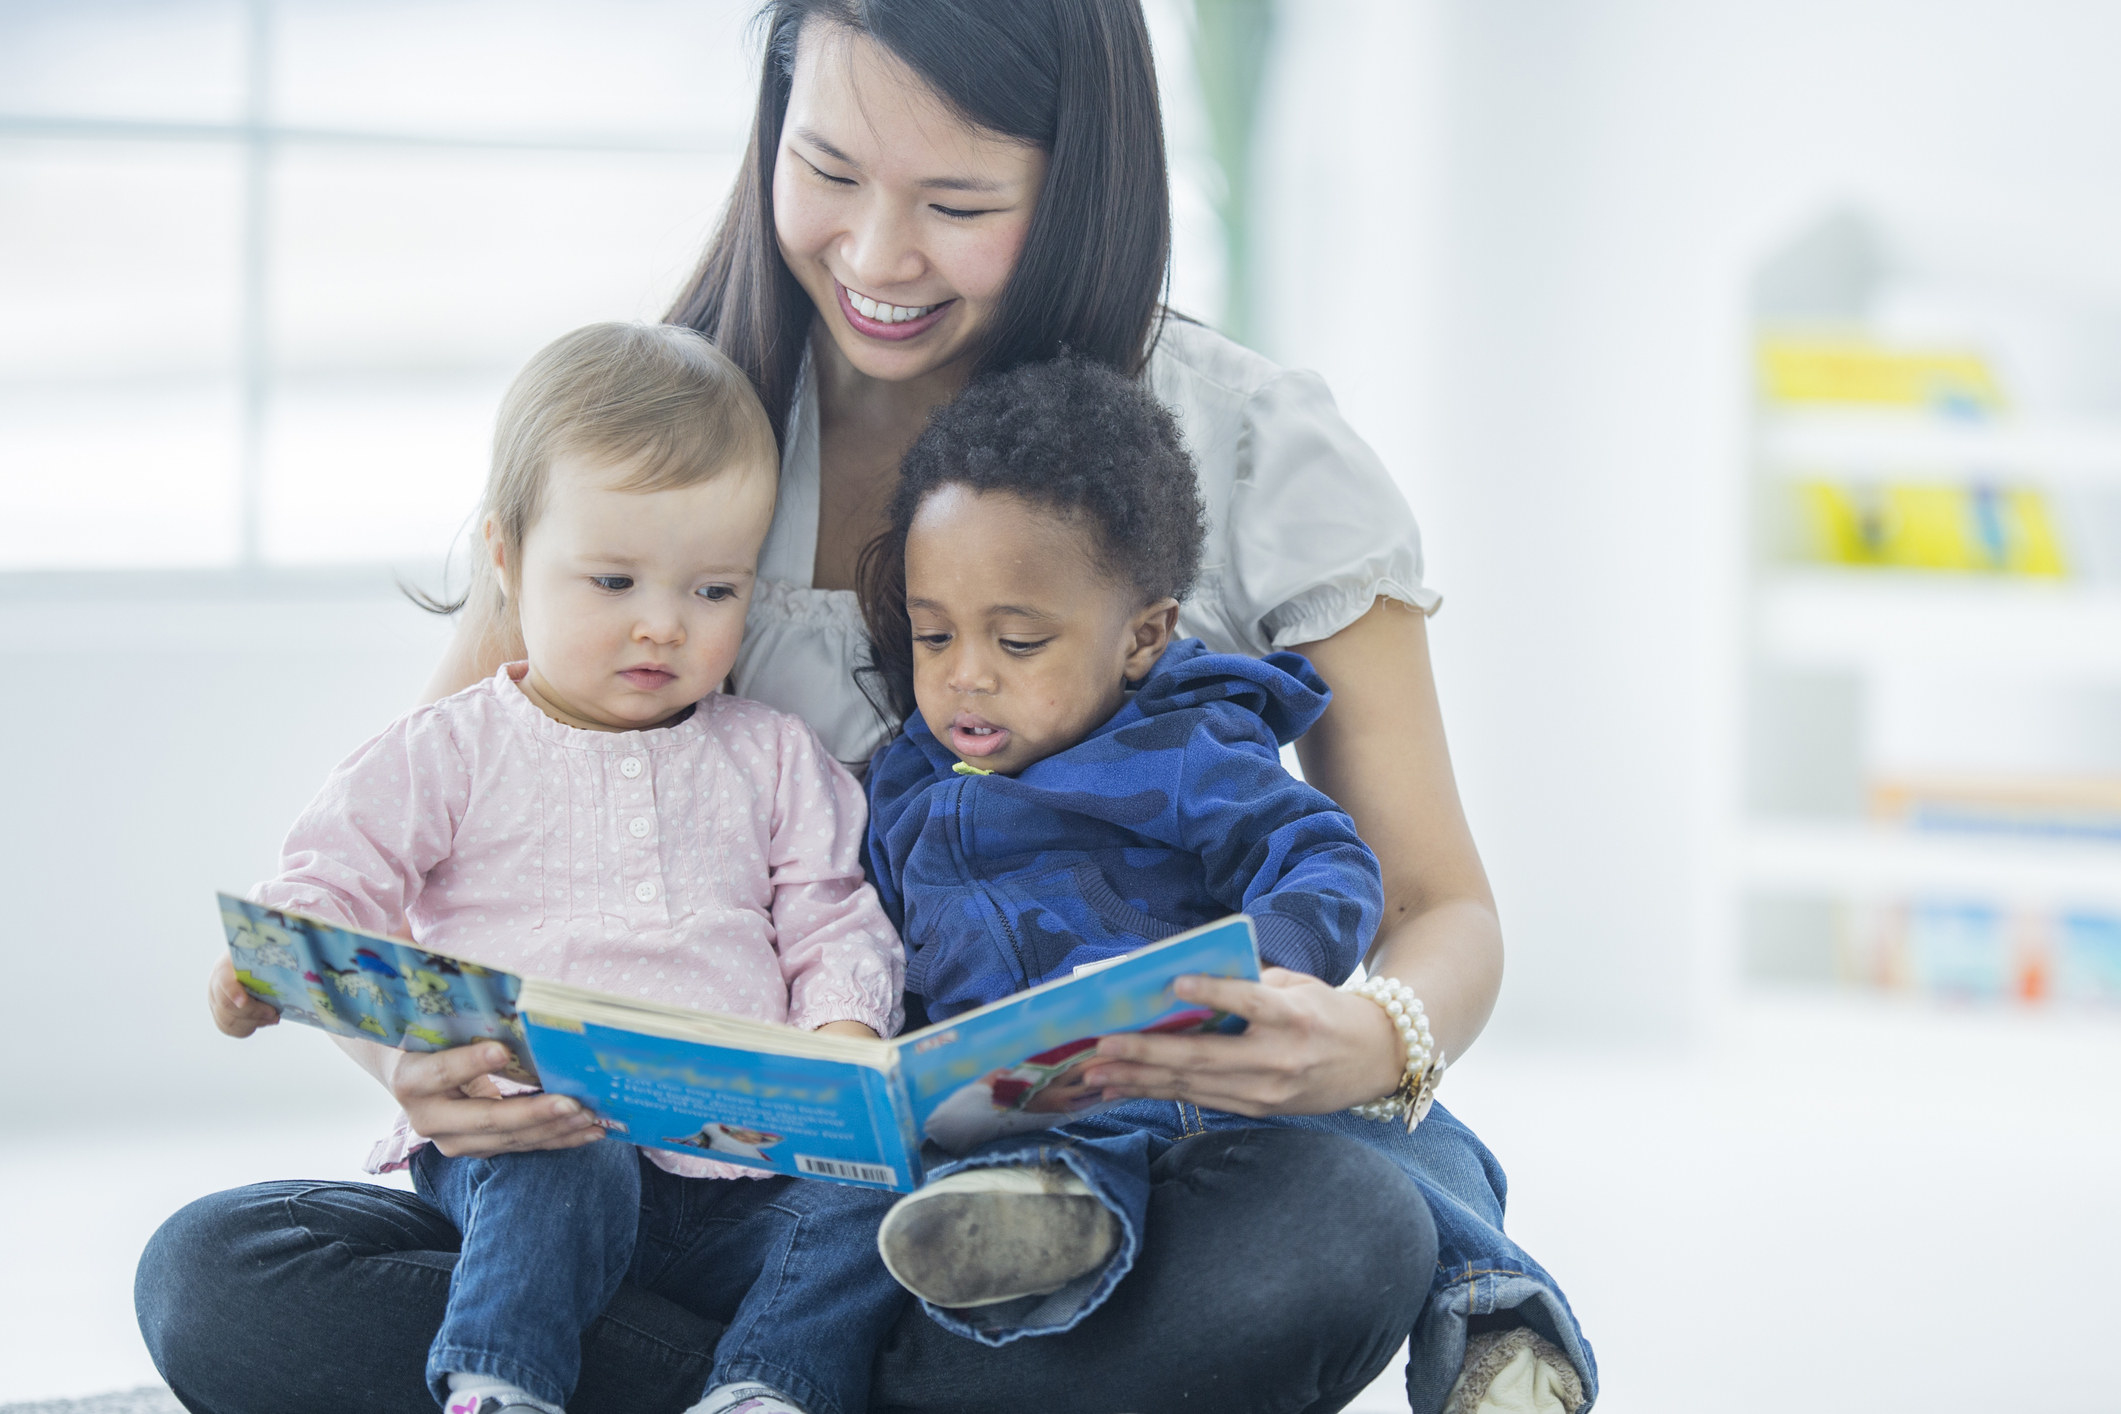 Woman with two toddler on her lap as she reads them a book